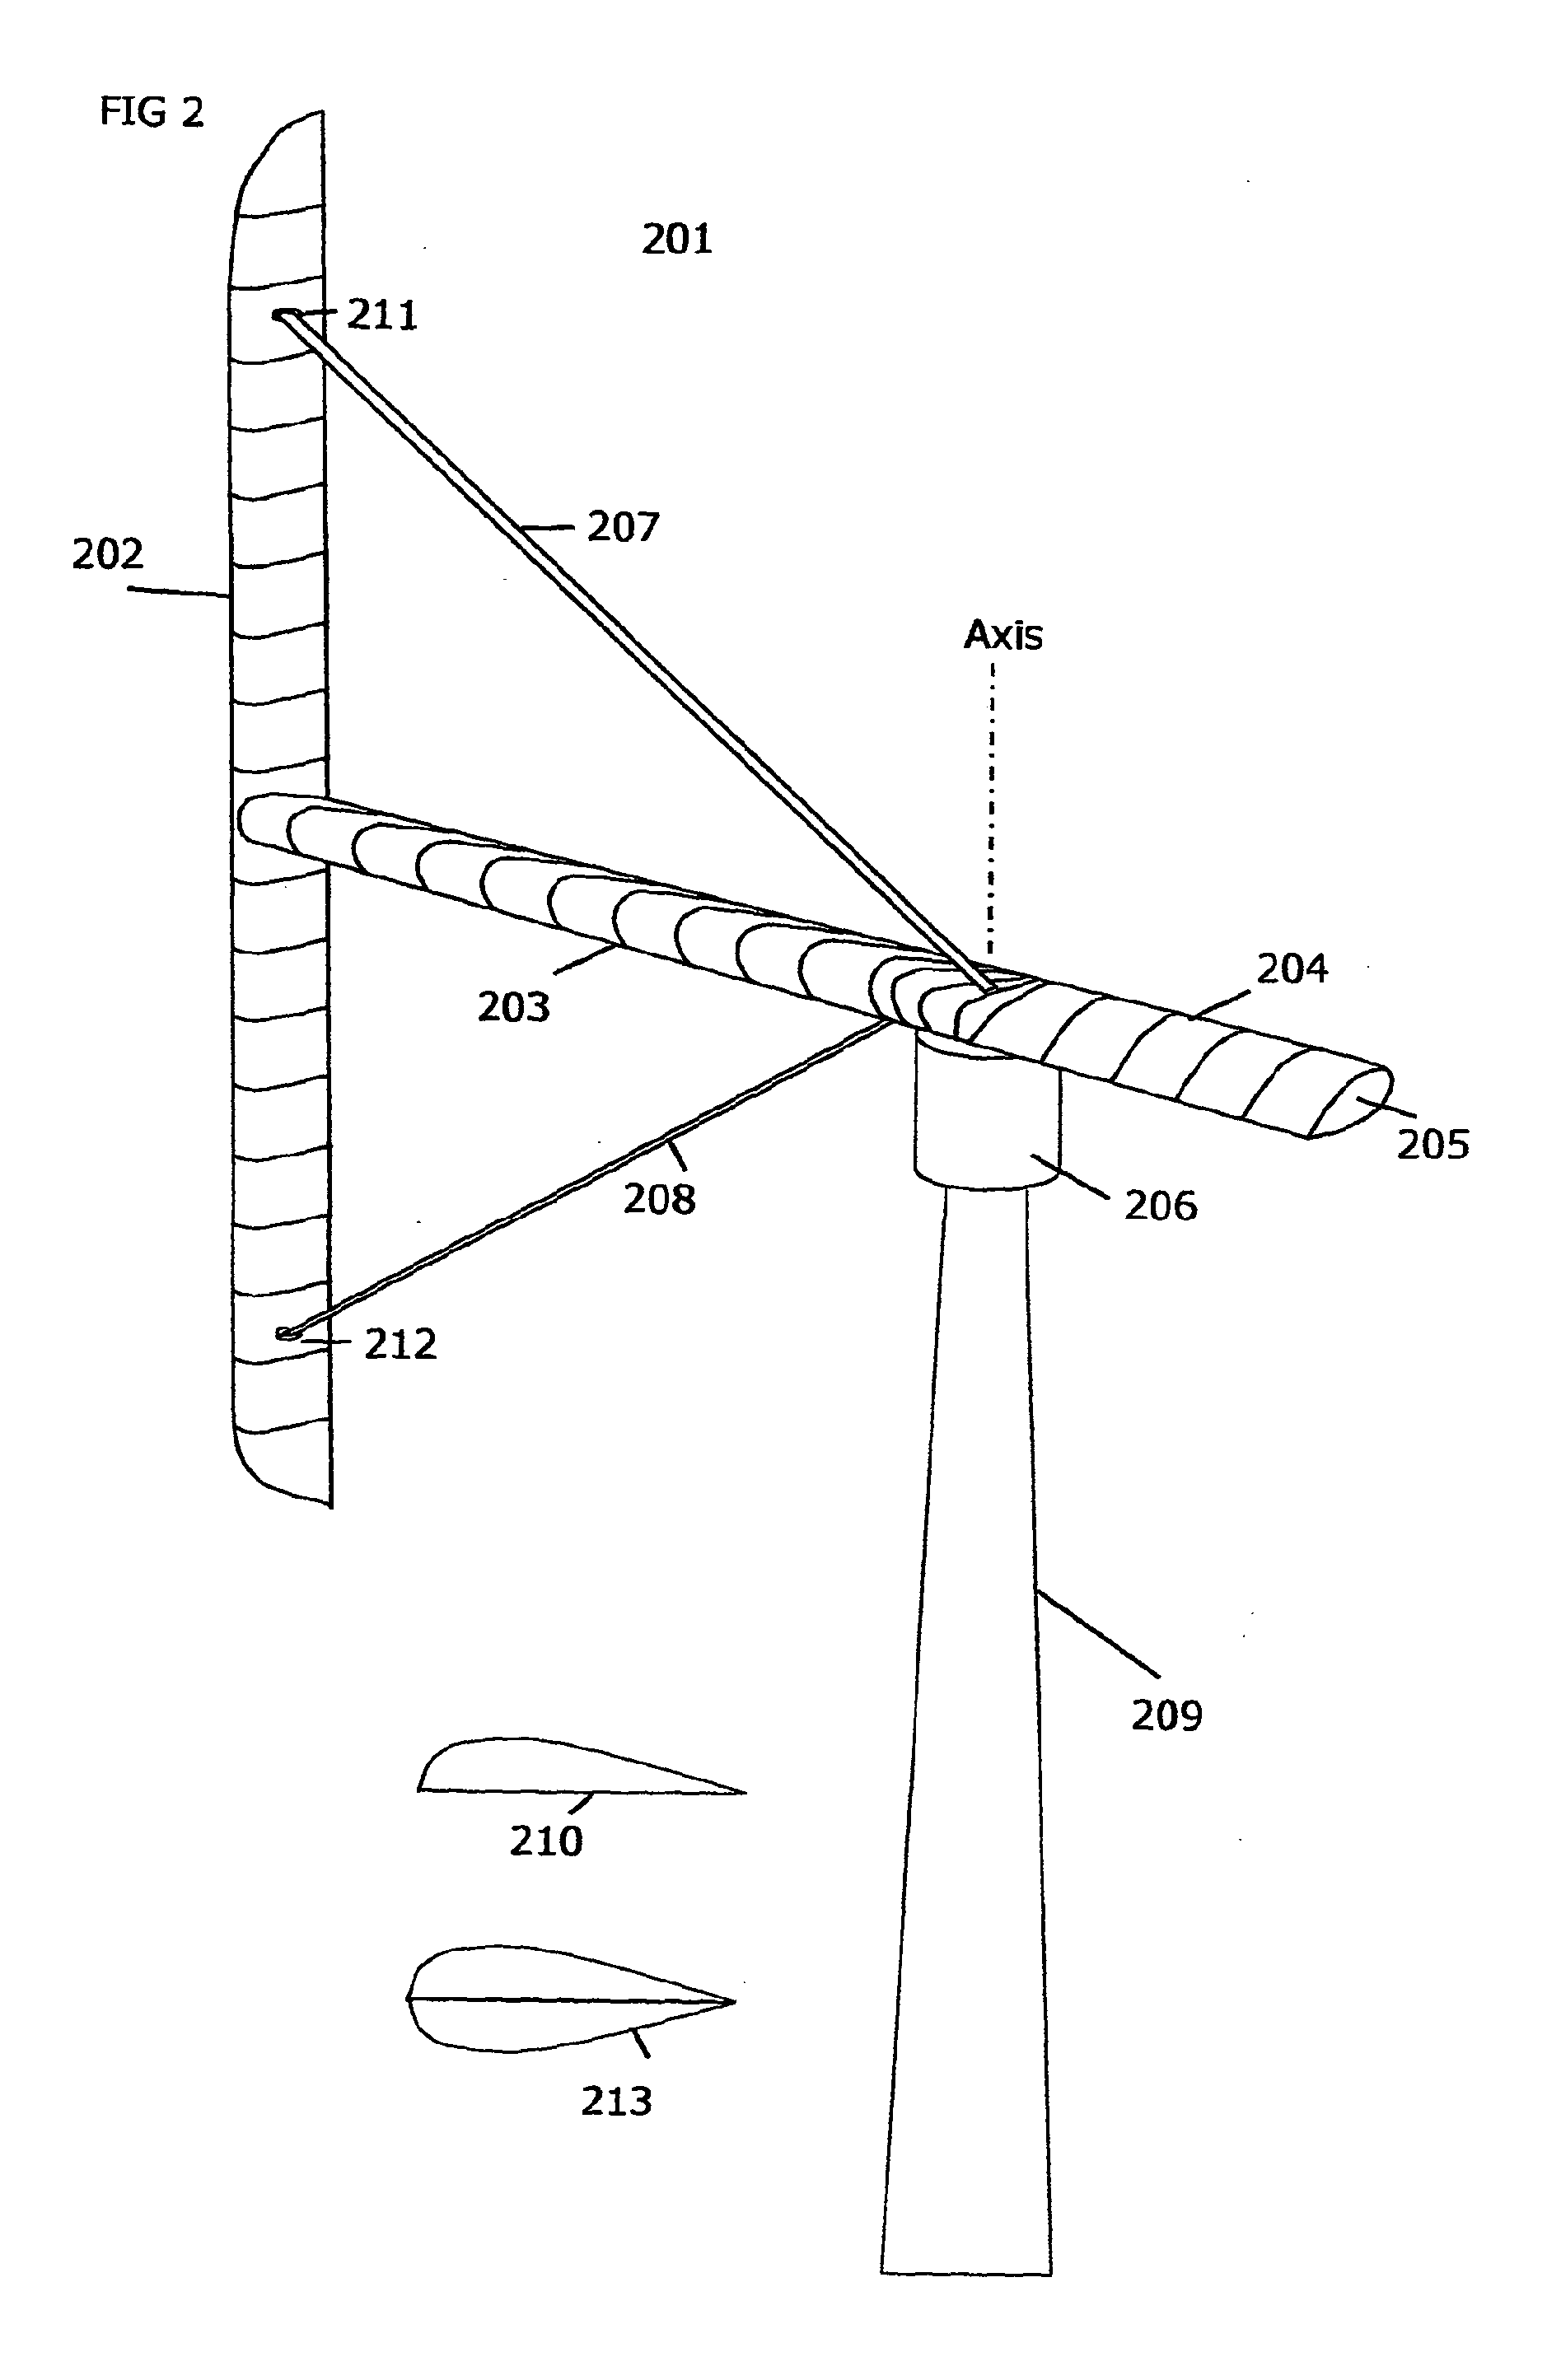 System and Method for a Vertical Axis Wind Turbine